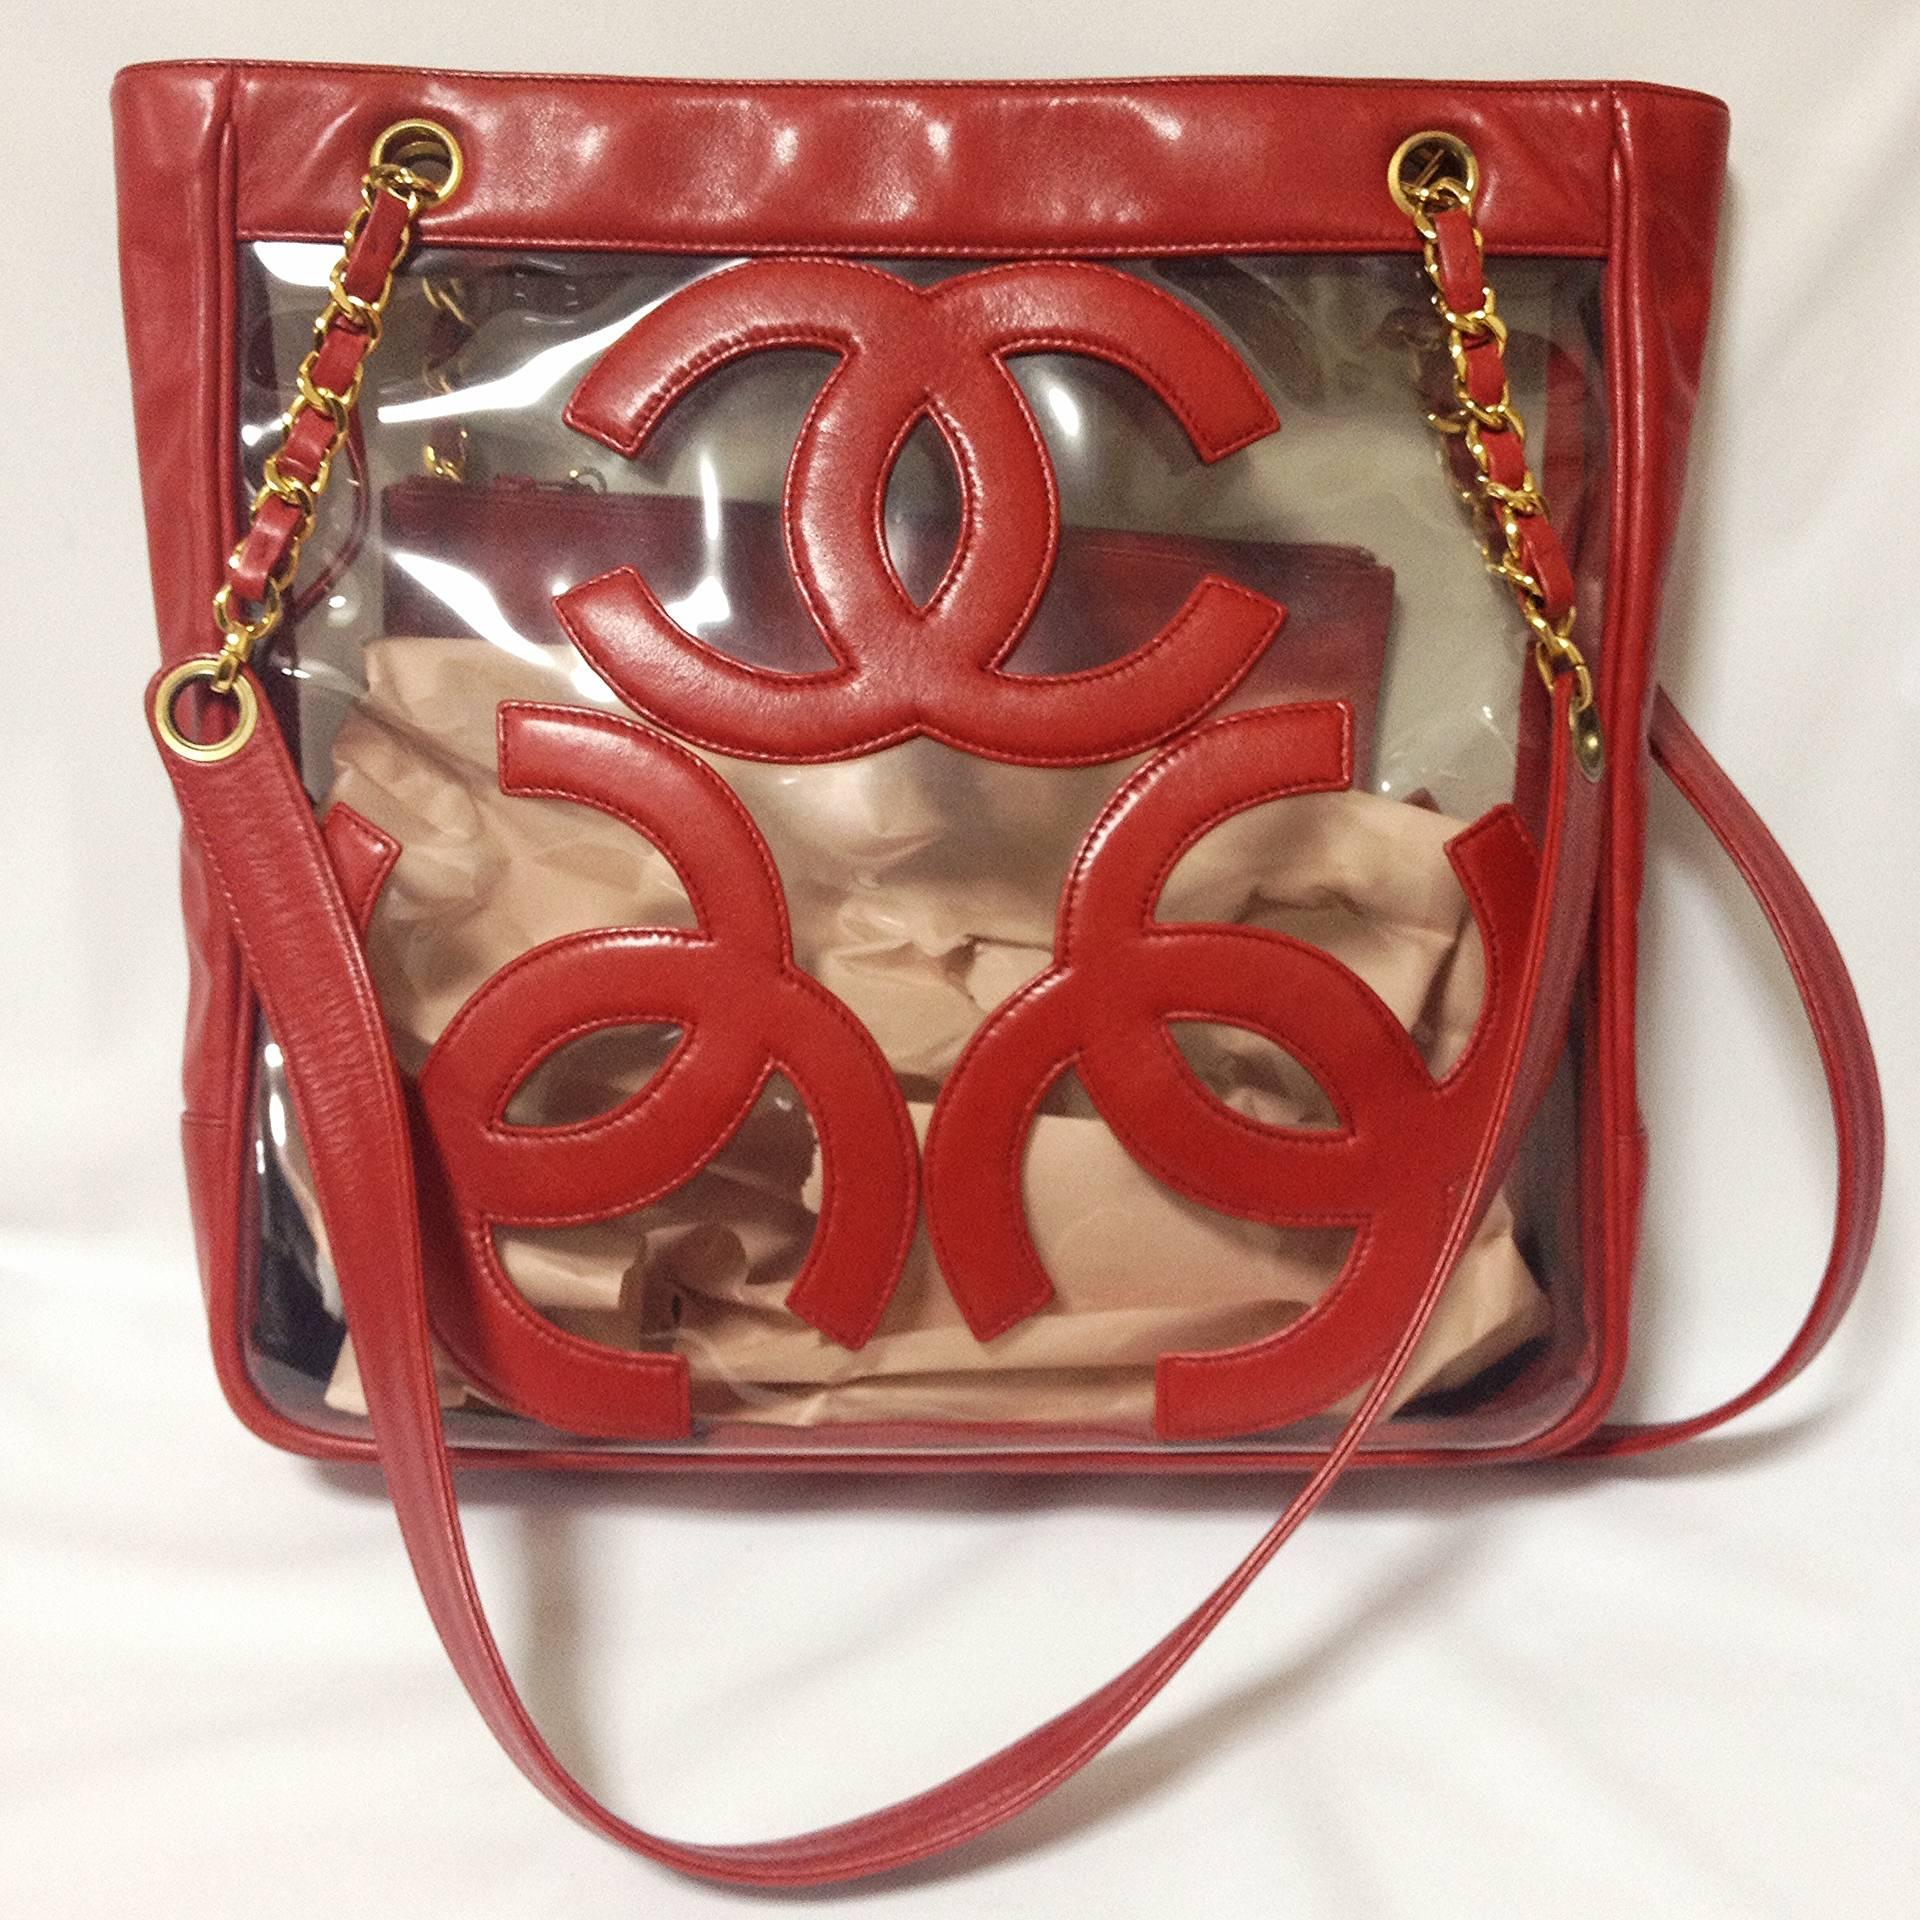 Vintage CHANEL clear vinyl and red leather combination shoulder purse, tote with CC marks and matching pouch. Golden chain.

****The navy version is also available! ****

If you are looking for a vintage CHANEL in classic style but something a